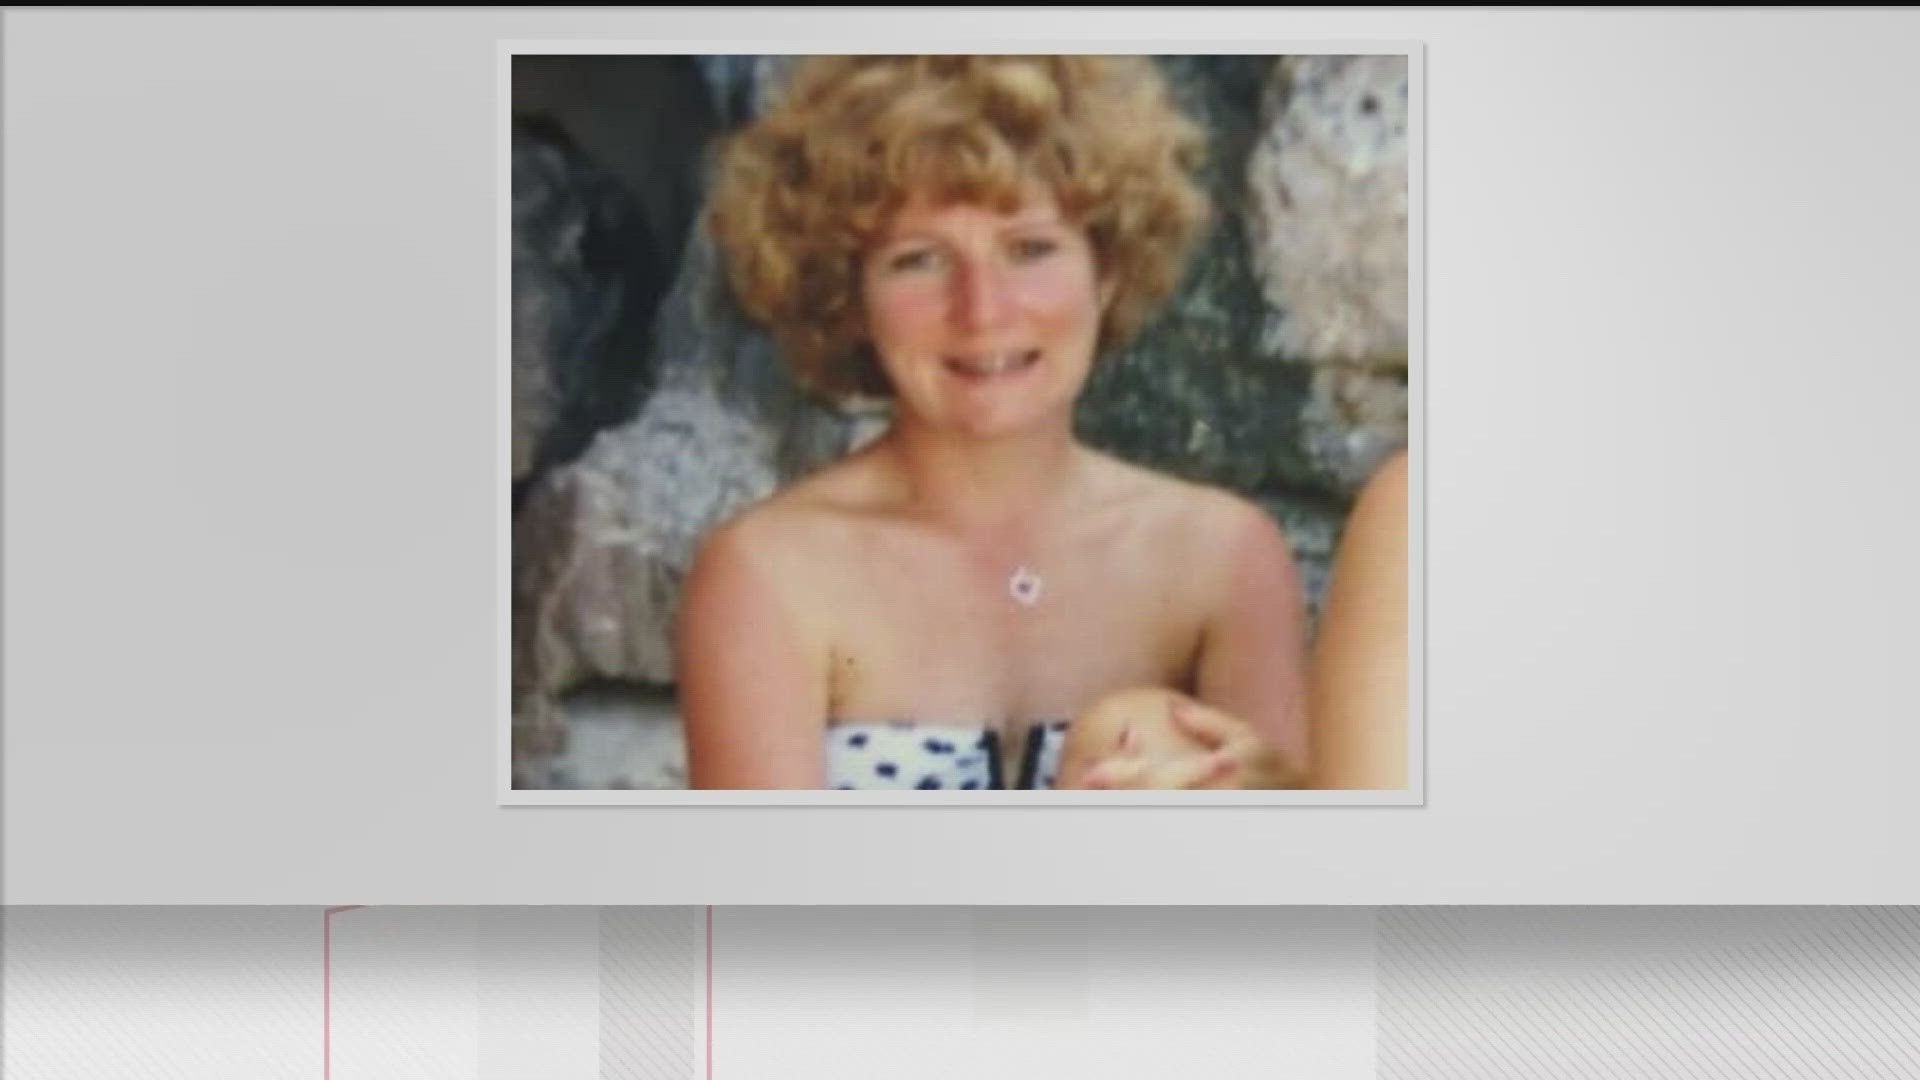 Heflin Police said a friend of Clara Kopp Reynolds who she was last seen with in 1989 is considered a suspect.